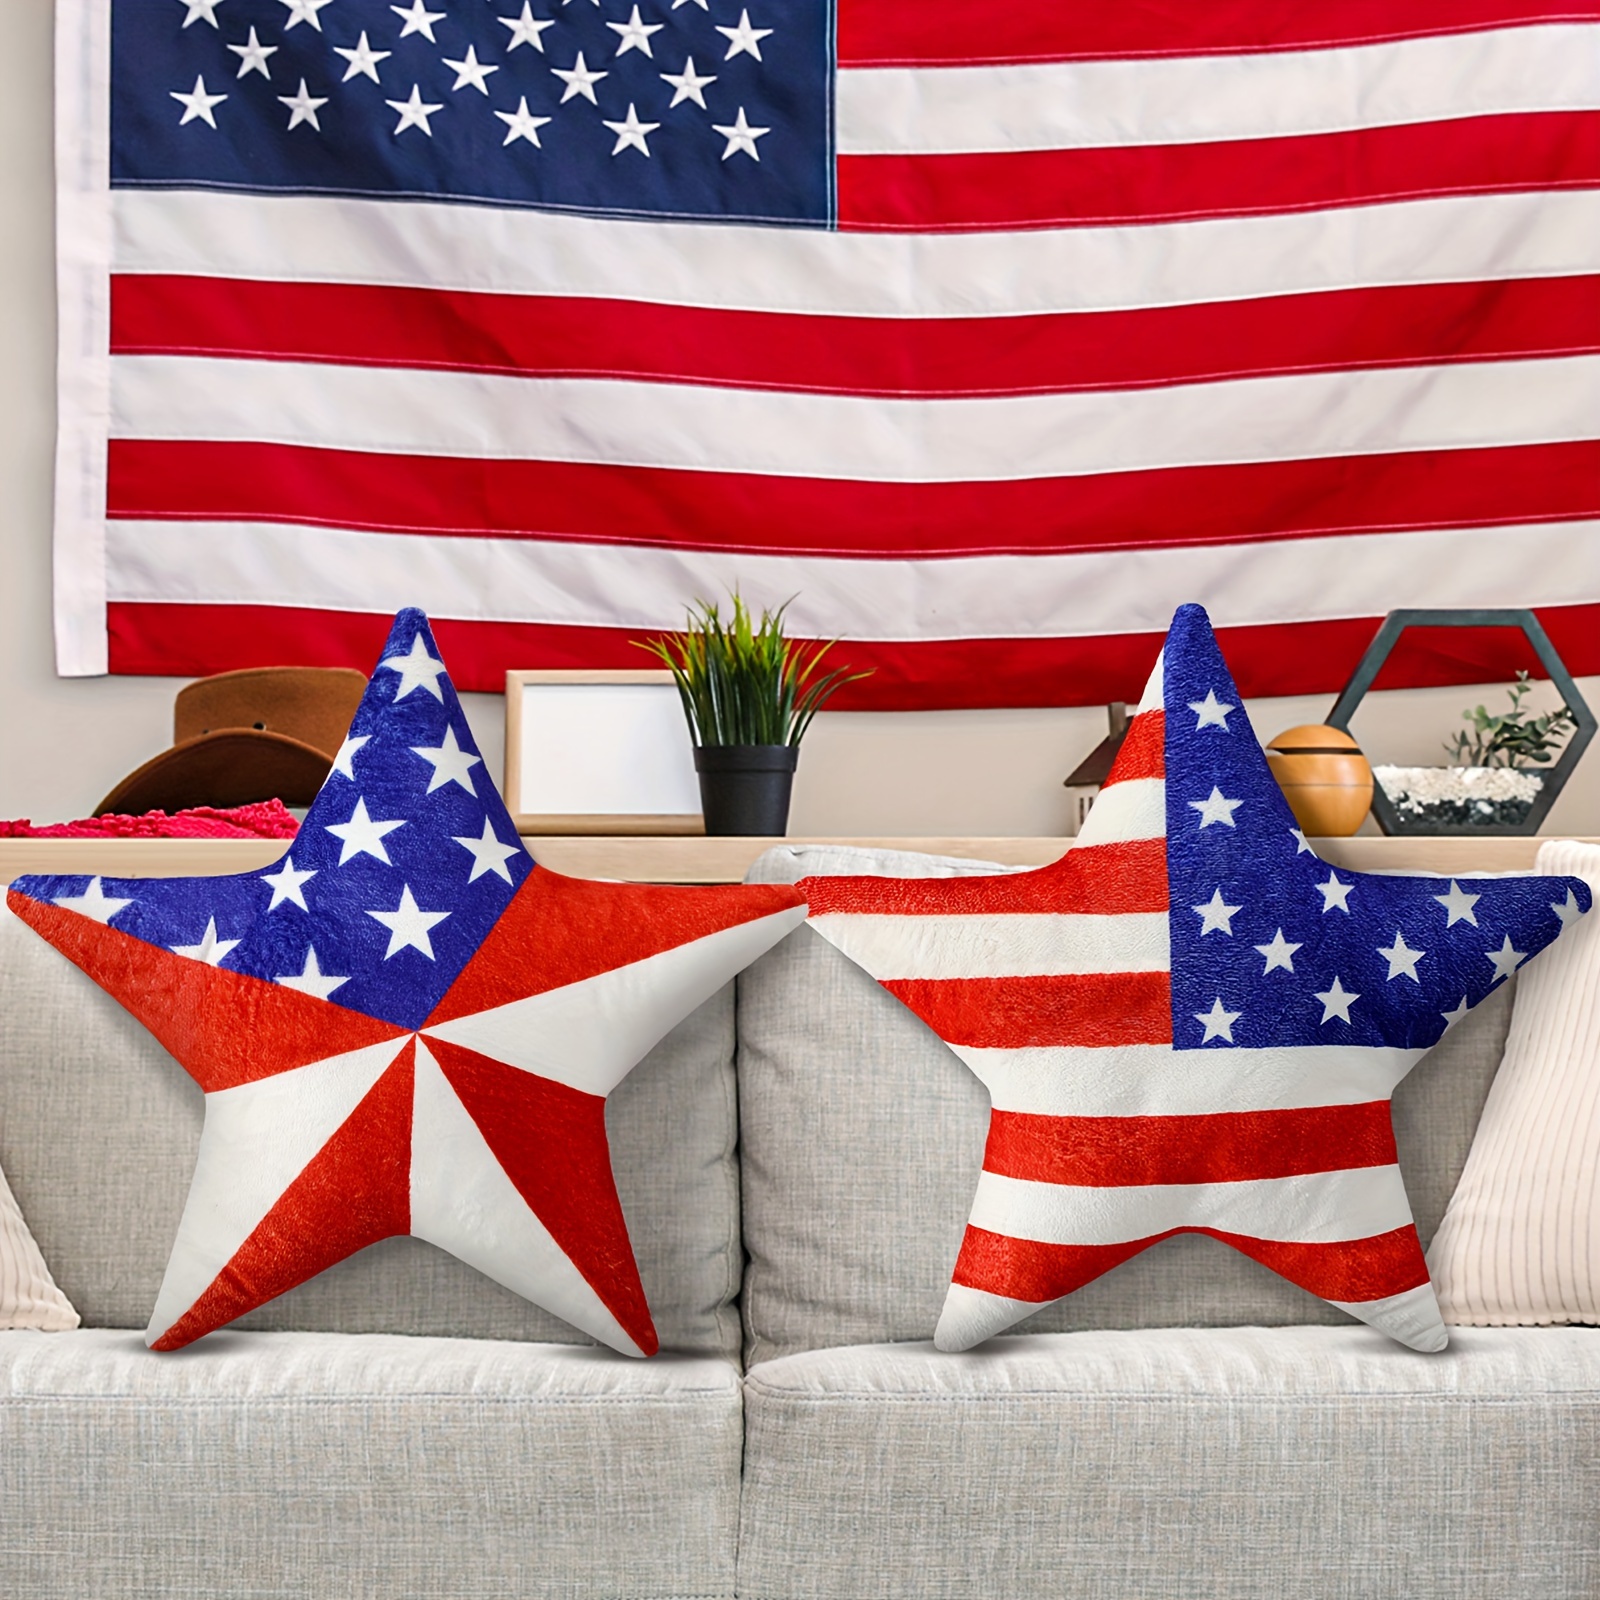 

2 Pcs 4th Of July Pillows Decorative Star Shape Throw Pillow American Flag Pillows Vintage Patriotic Decoration For Home Independence Day Cushion 13.78 X 13.78 Inches Cotton Linen For Sofa